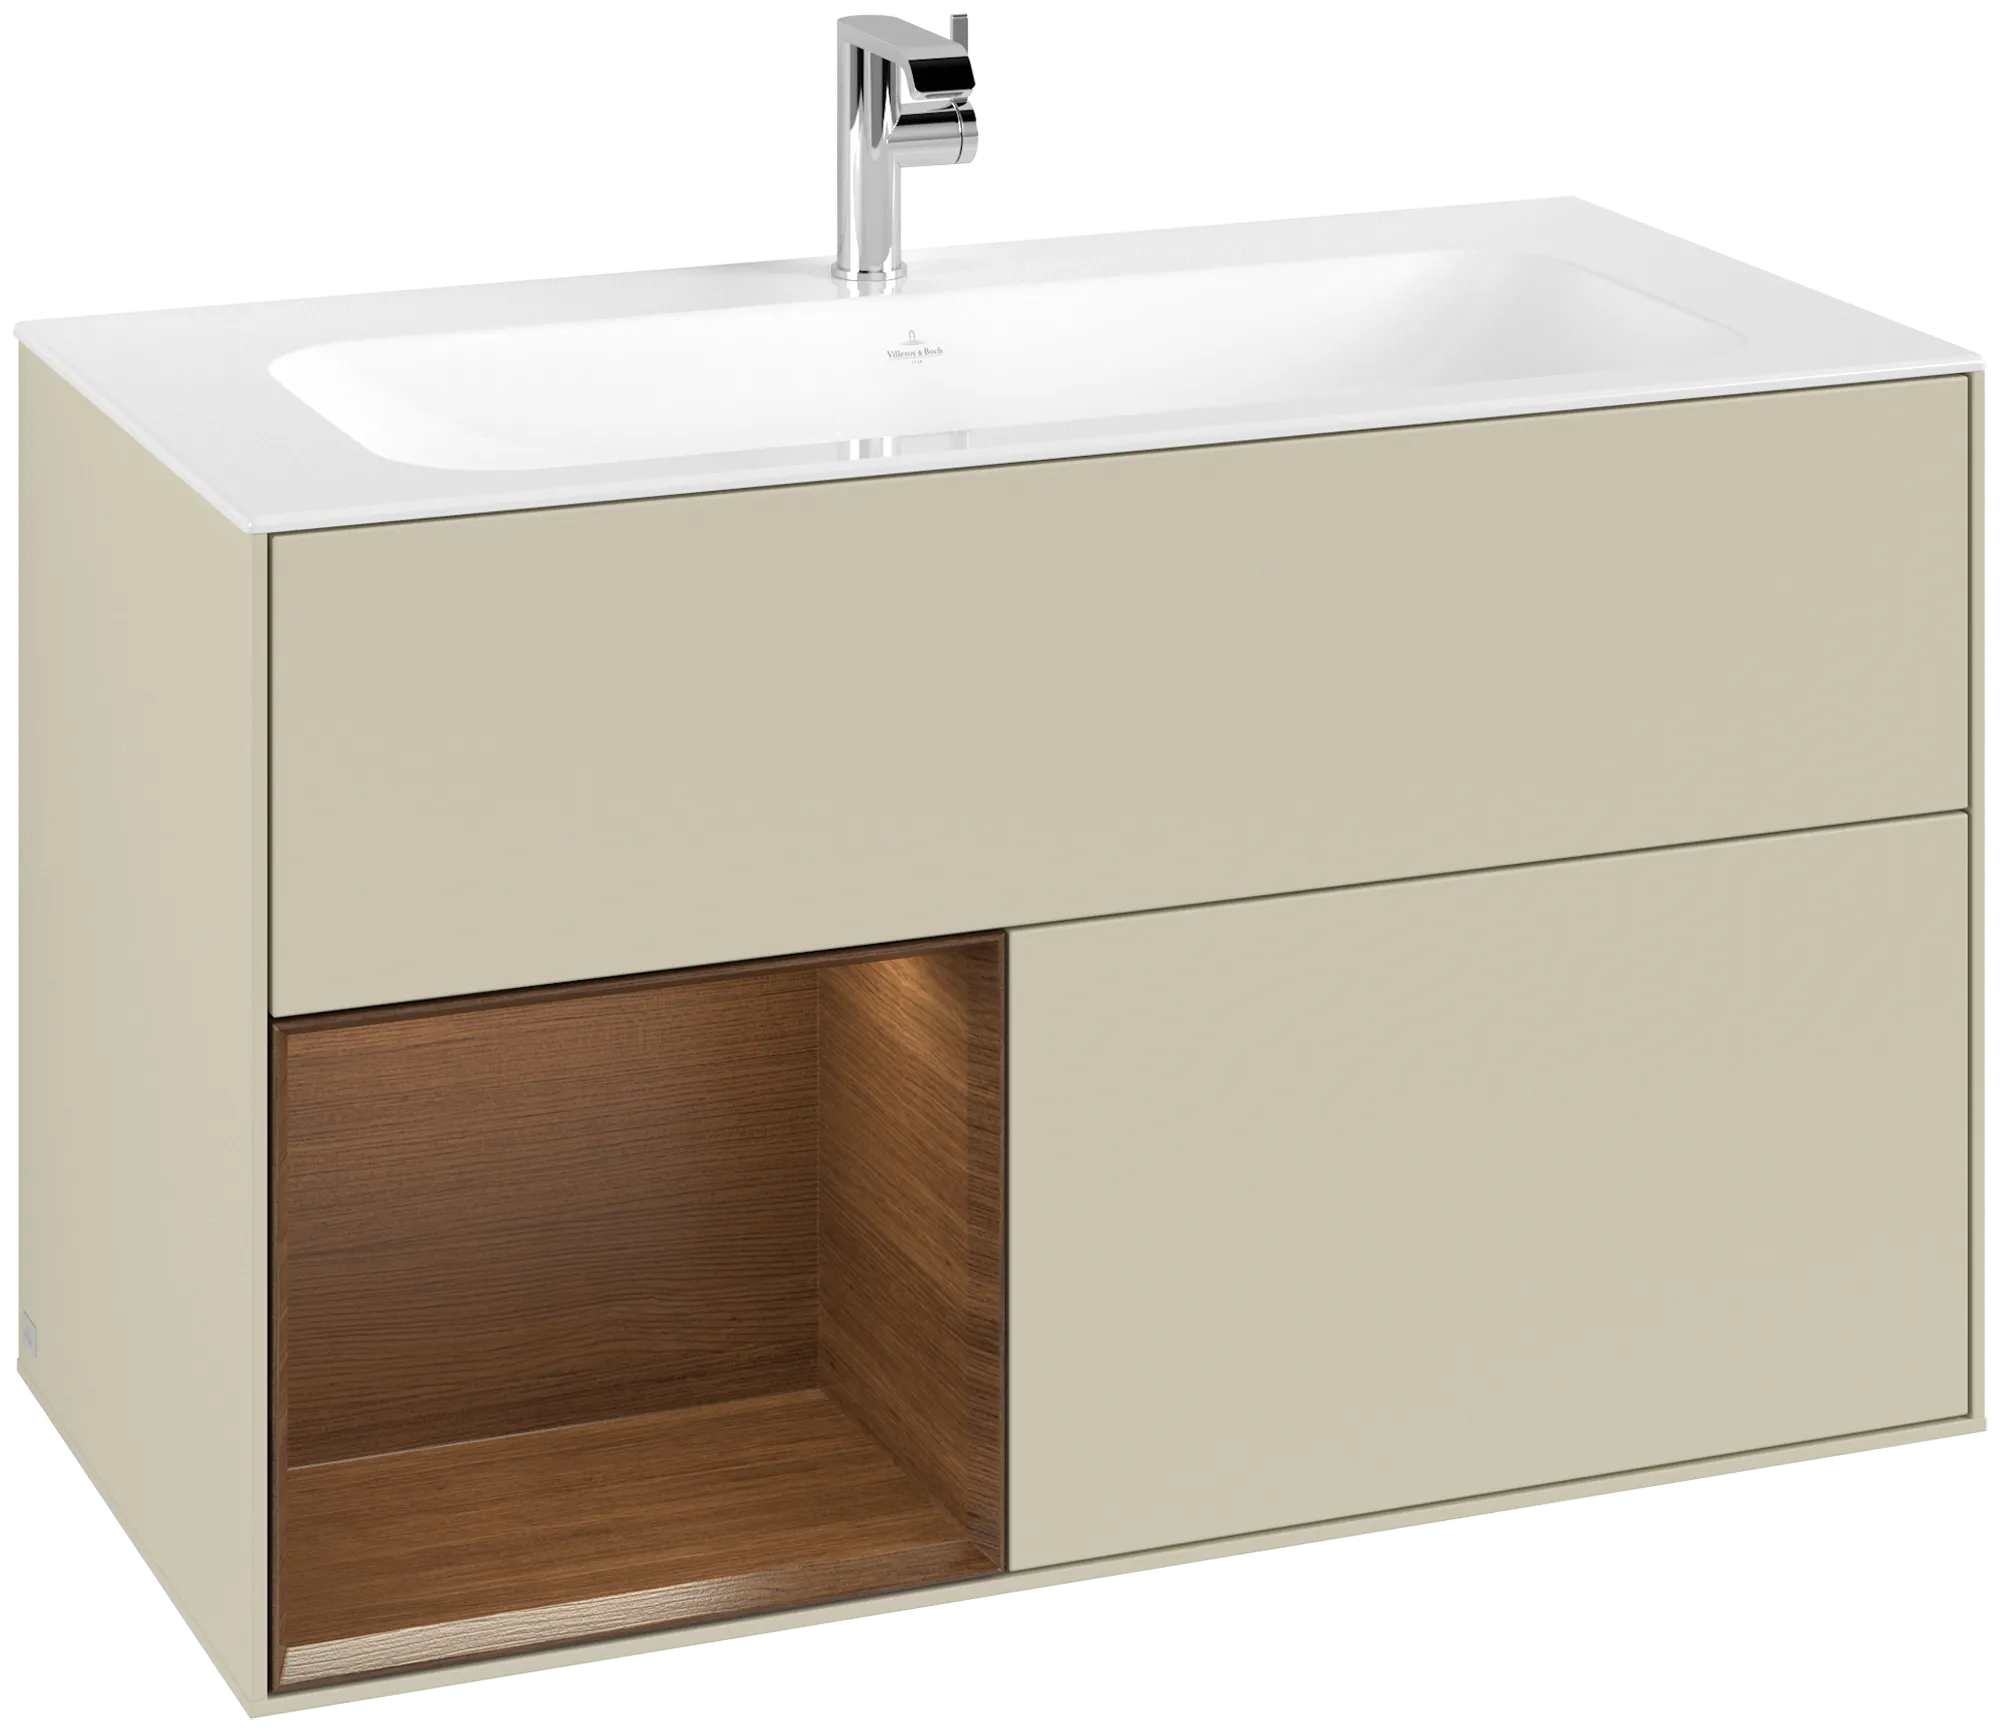 Picture of VILLEROY BOCH Finion Vanity unit, with lighting, 2 pull-out compartments, 996 x 591 x 498 mm, Silk Grey Matt Lacquer / Walnut Veneer #G030GNHJ